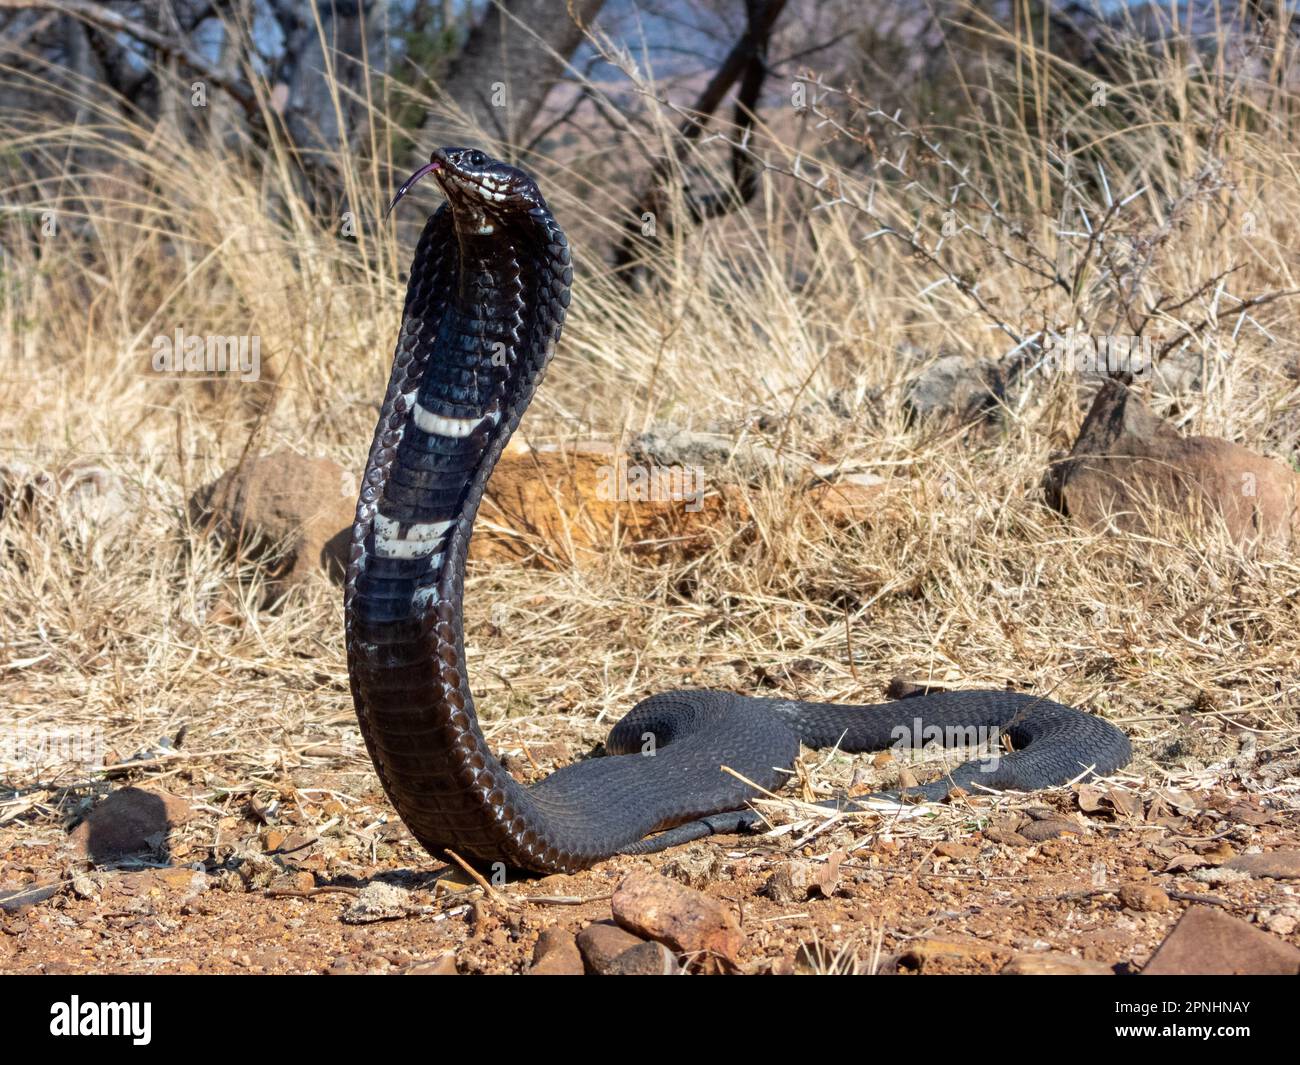 A Rinkhals, a dangerously venomous spitting snake from South Africa. Stock Photo